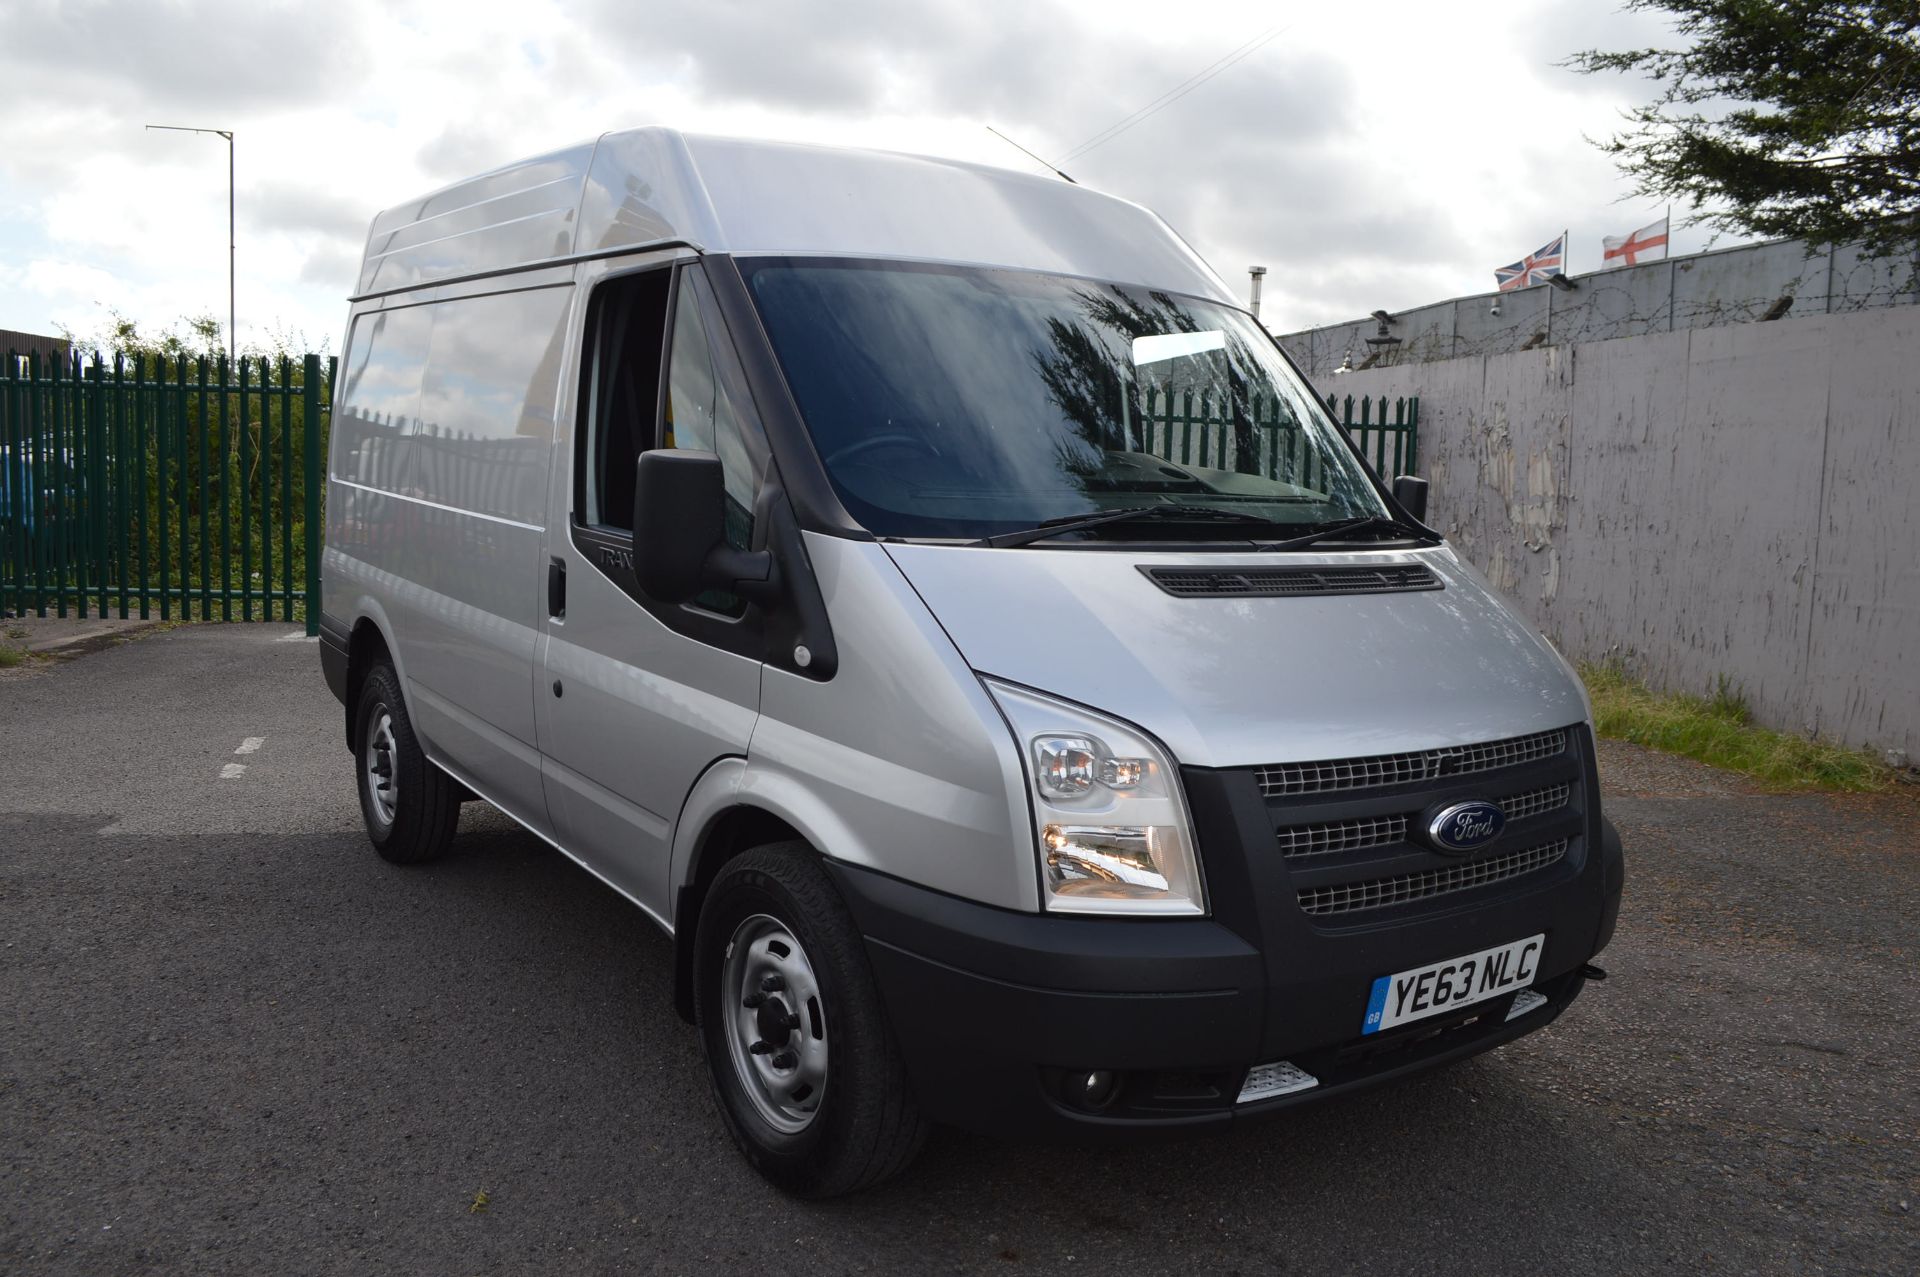 2013/63 REG FORD TRANSIT 125 T330 FWD - 1 OWNER FROM NEW, AIR CON, HEATED WINDSCREEN! *NO VAT*